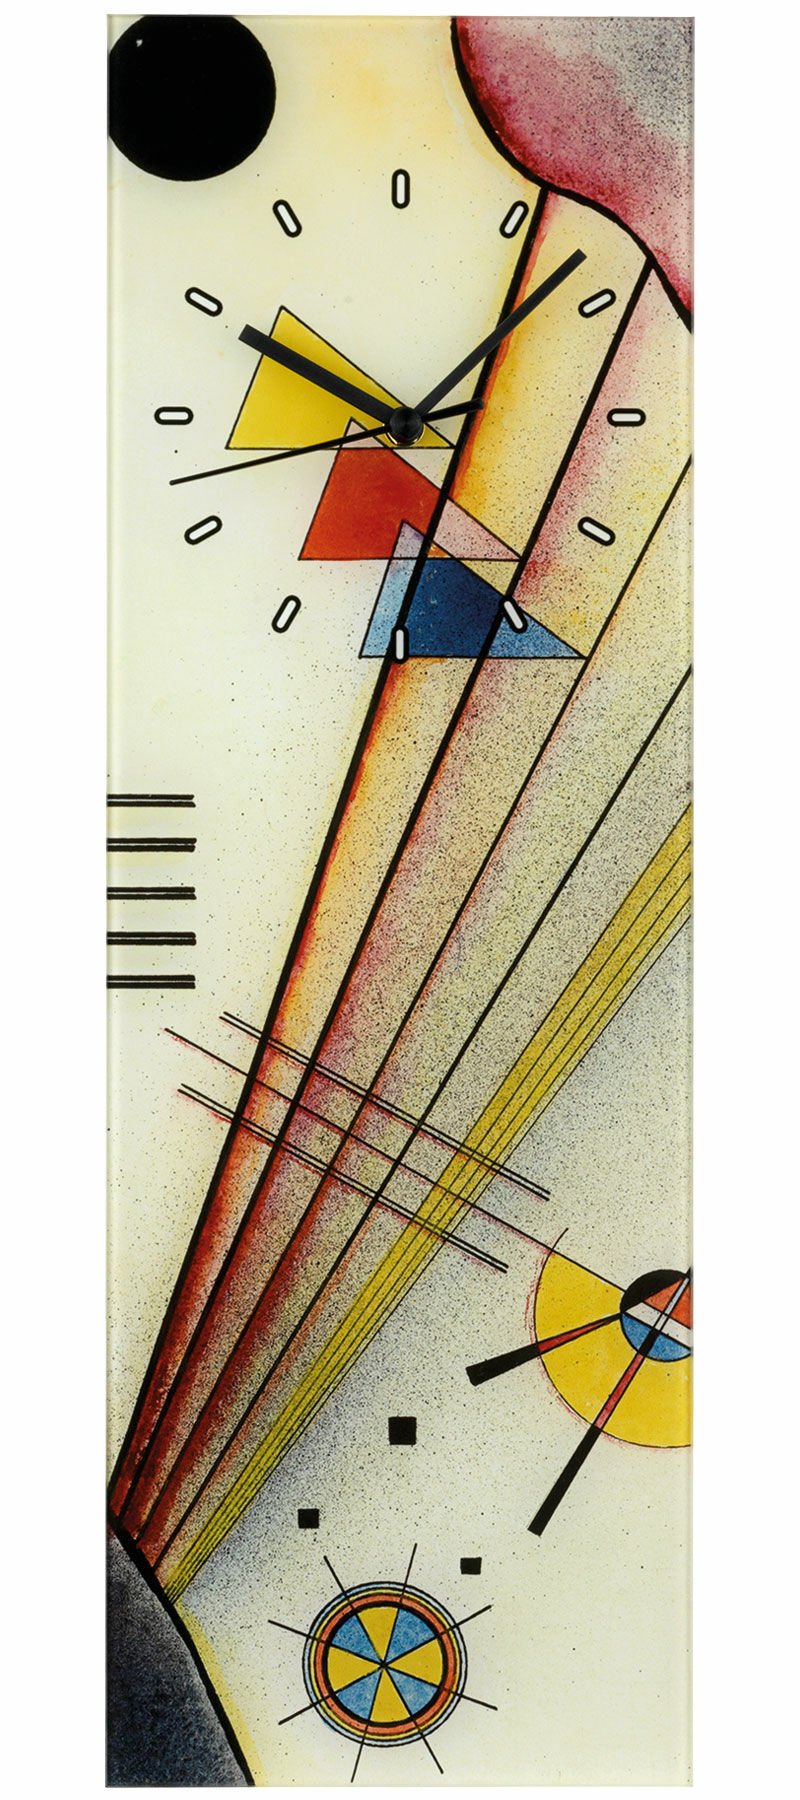 Wall clock "Clear Connection" by Wassily Kandinsky